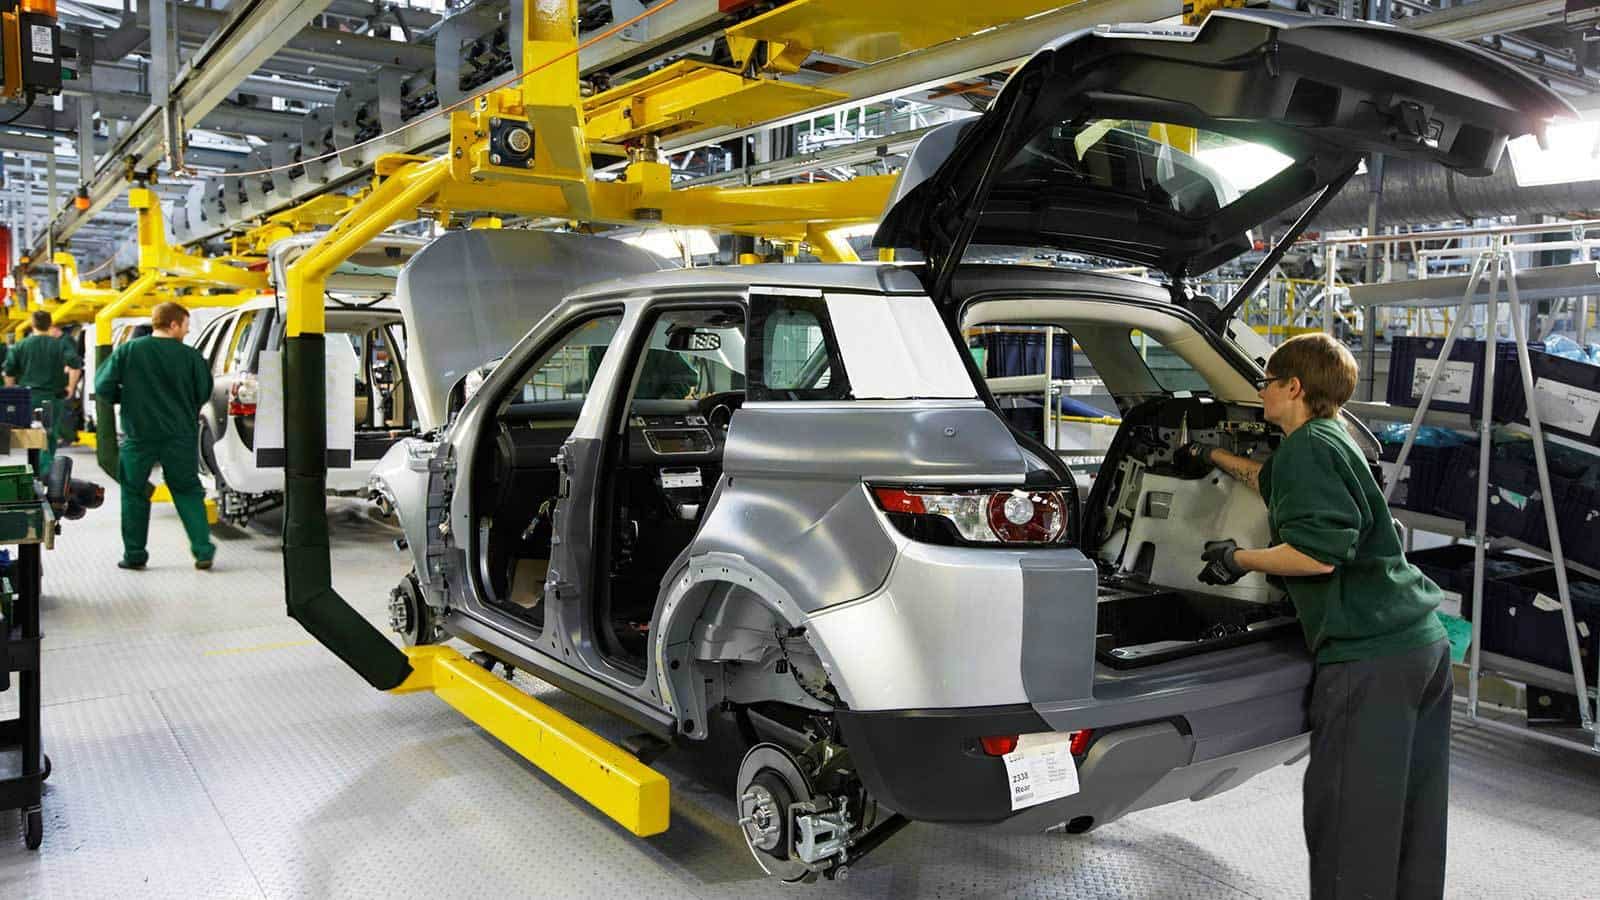 Range Rover trim manual inspection on assembly line